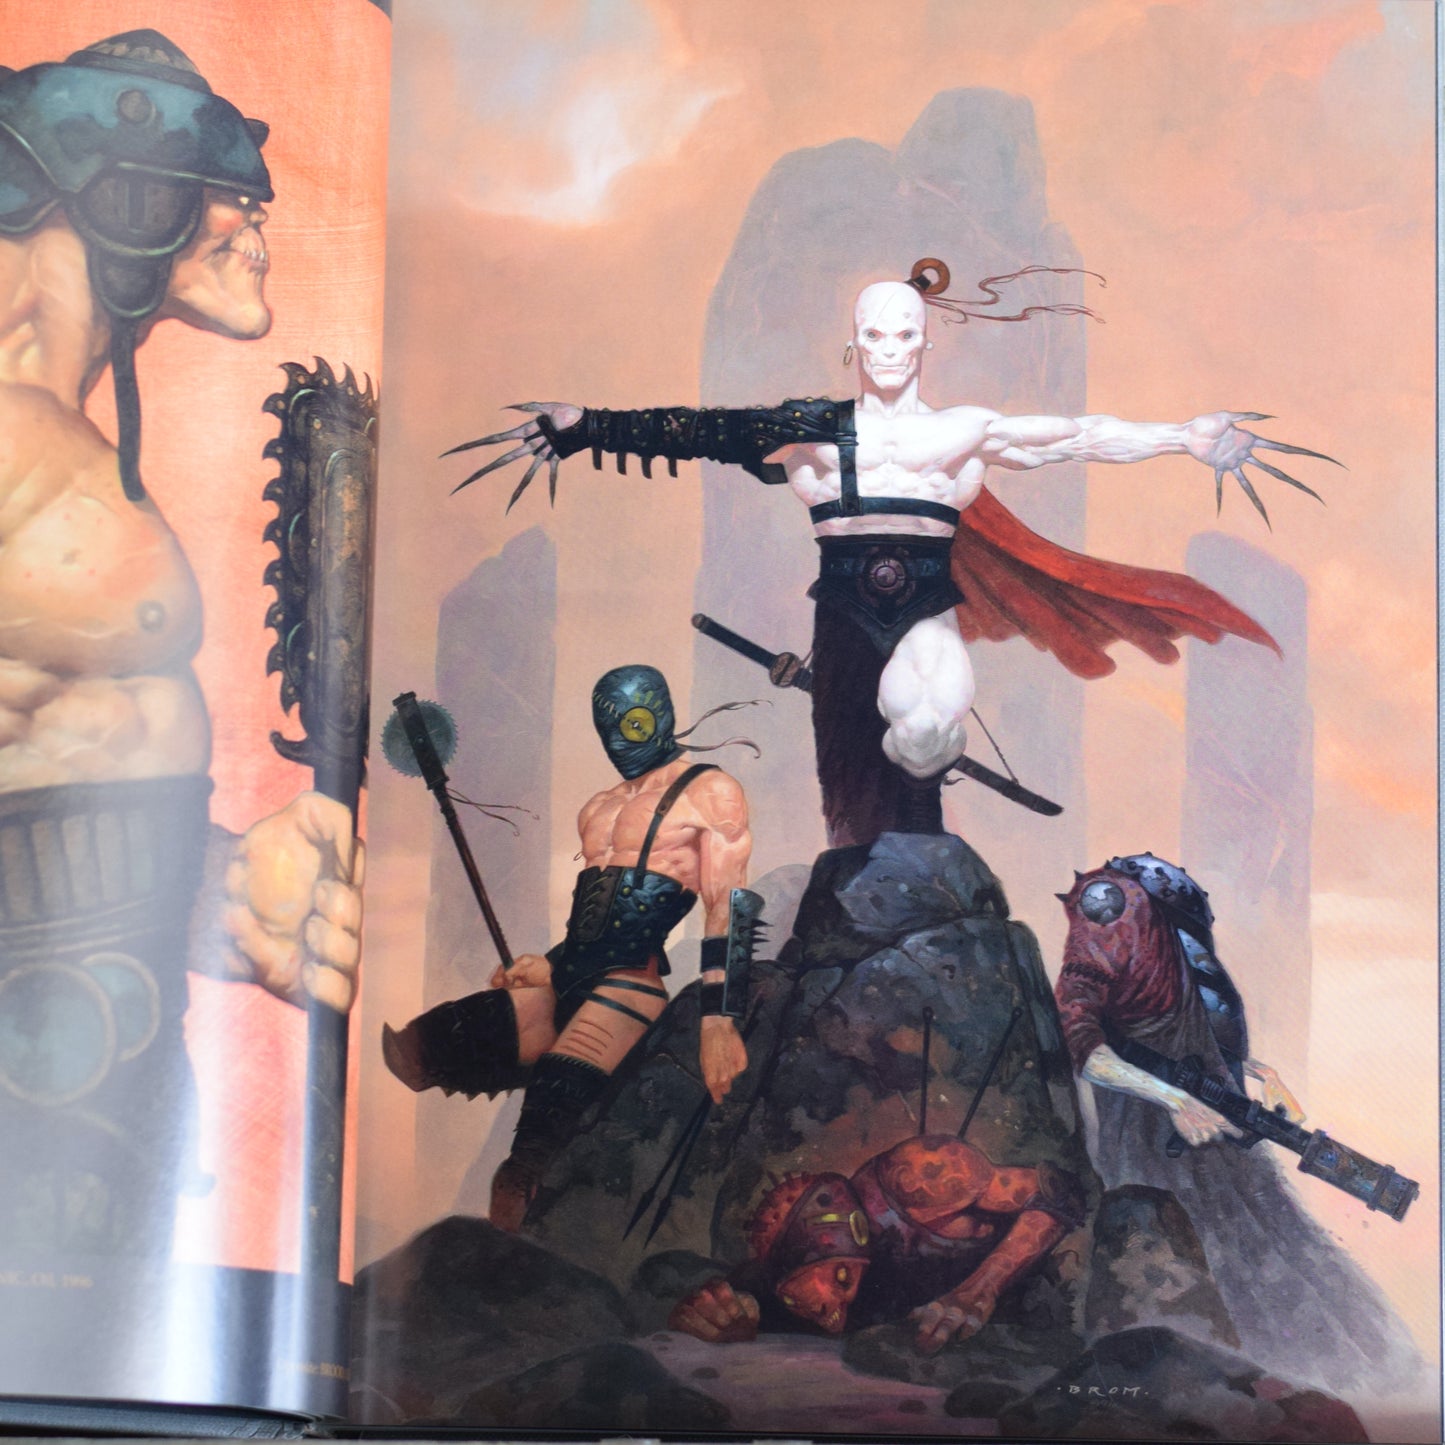 Fantasy Art Hardback: Gerald Brom - The Art of Brom (Publishers Edition) SIGNED FIRST EDITION